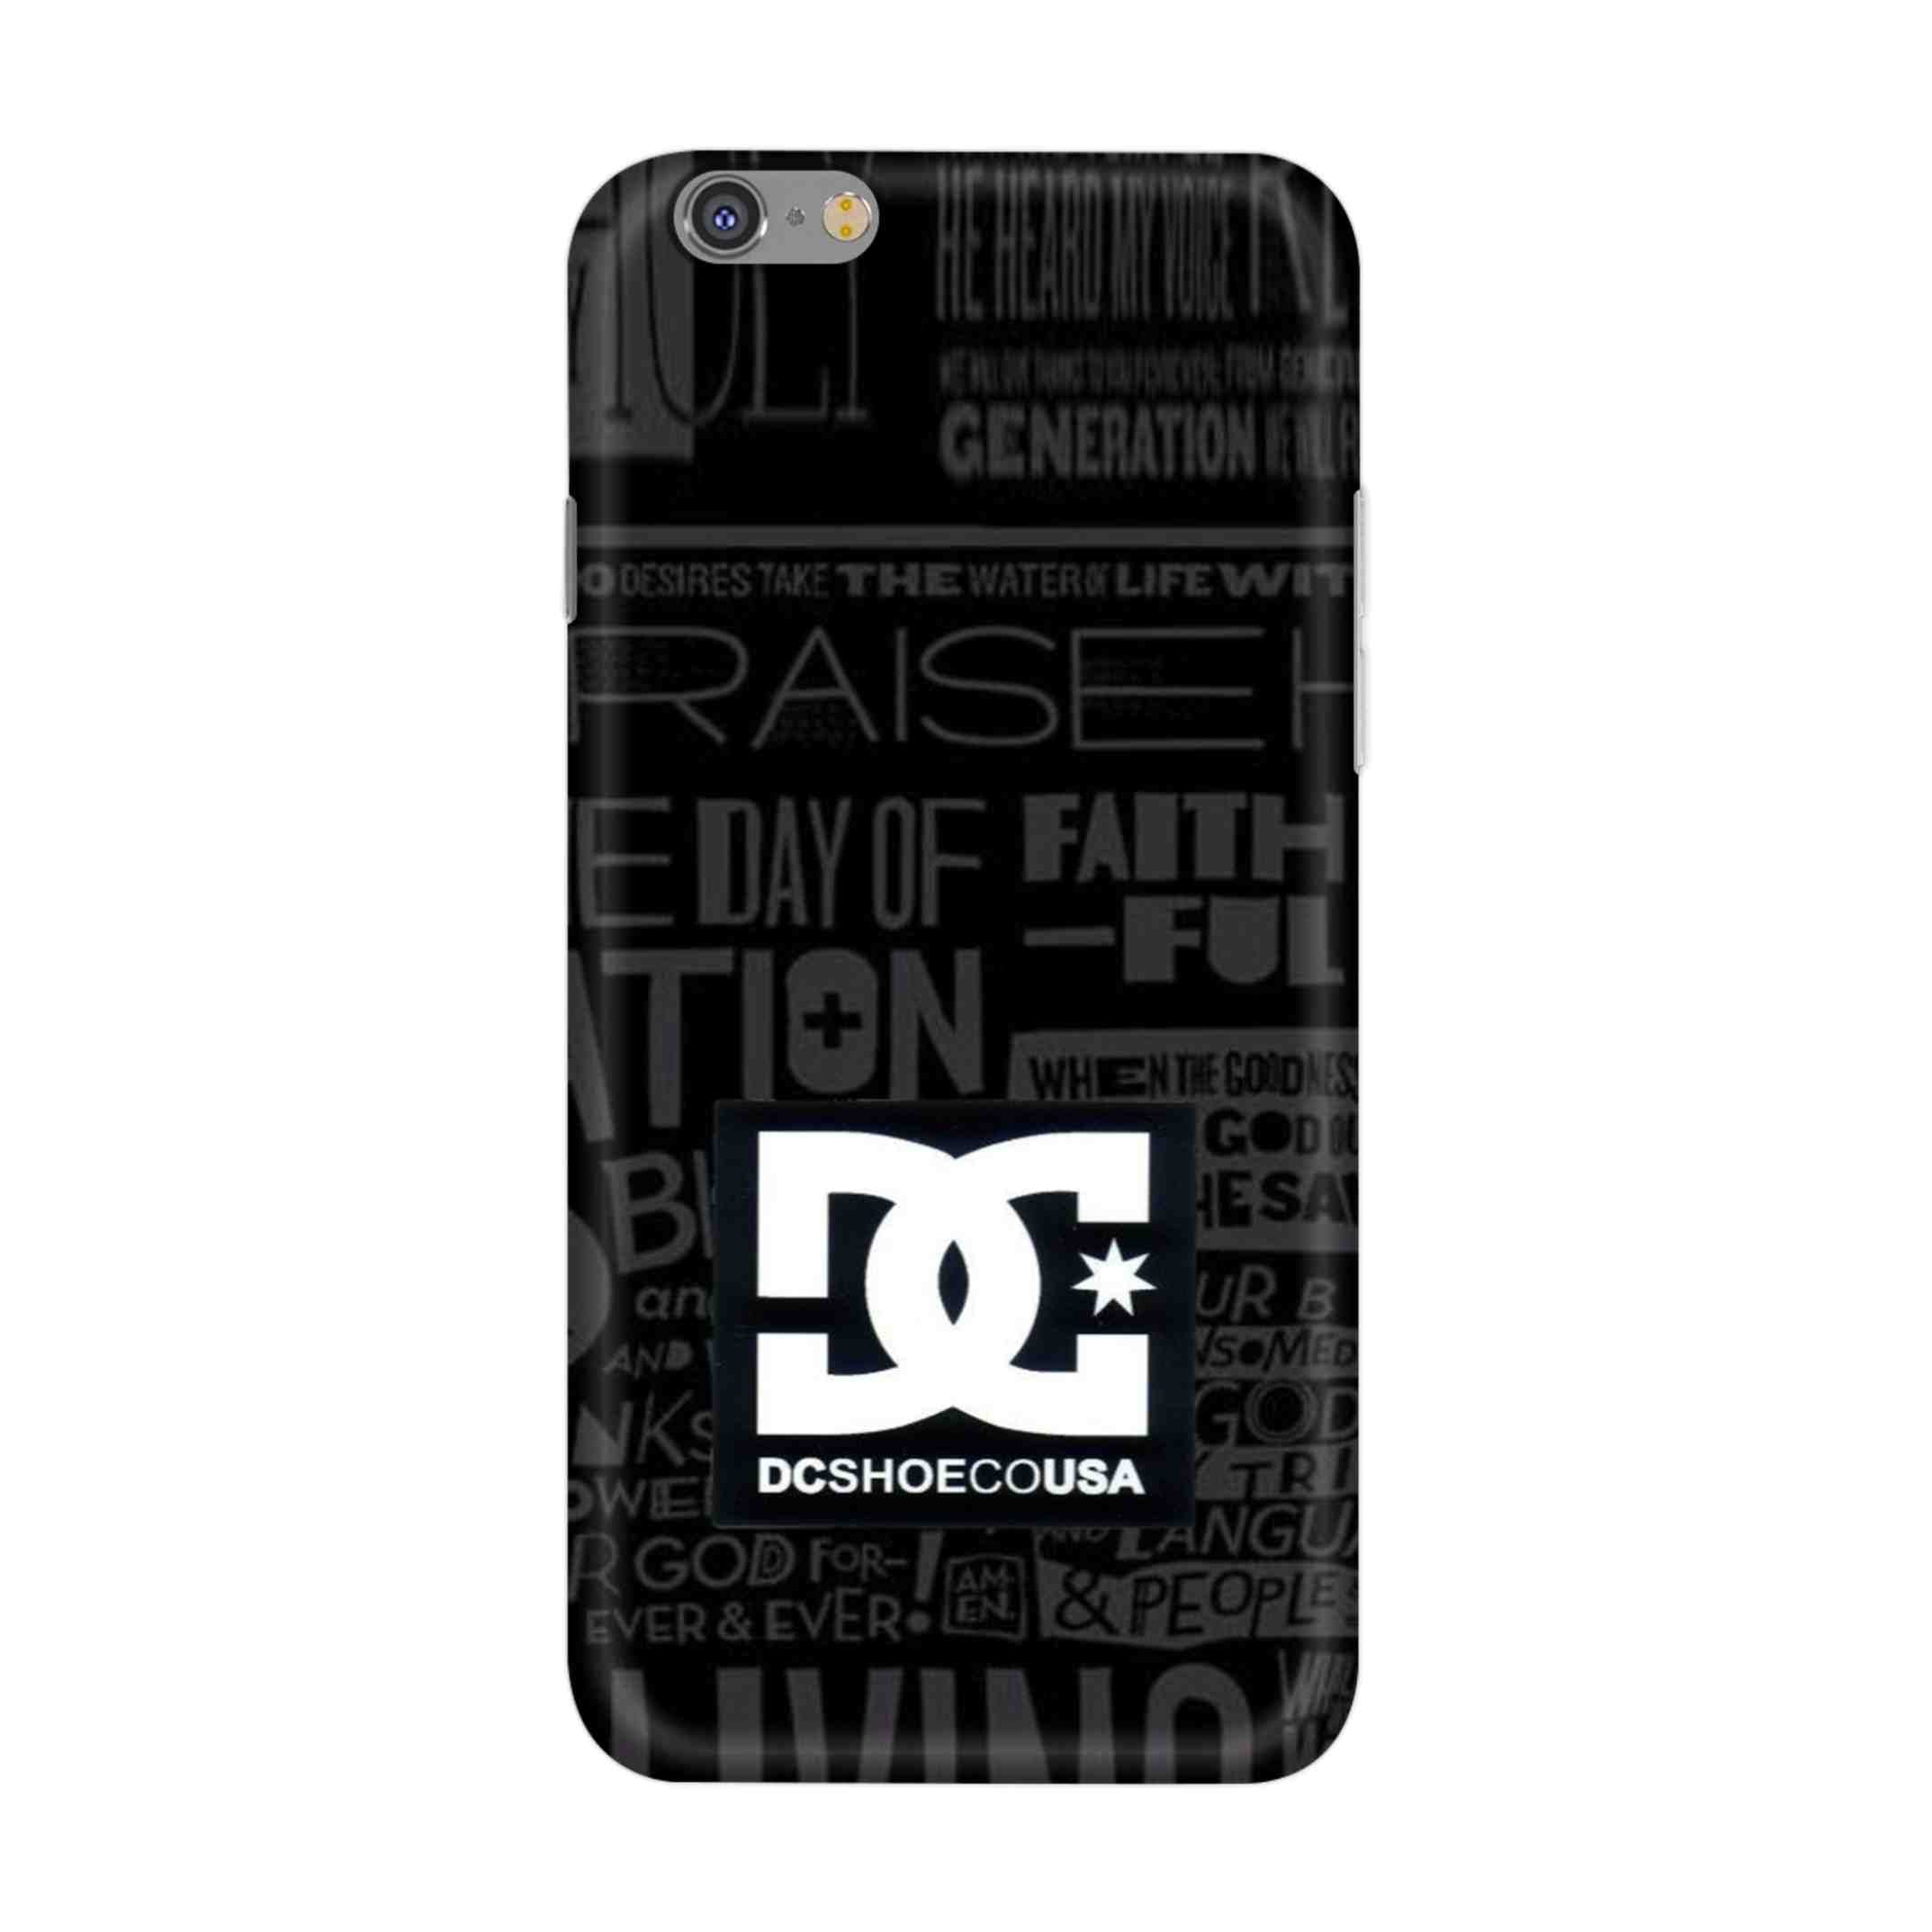 Buy Dc Shoecousa Hard Back Mobile Phone Case/Cover For iPhone 6 Plus / 6s Plus Online